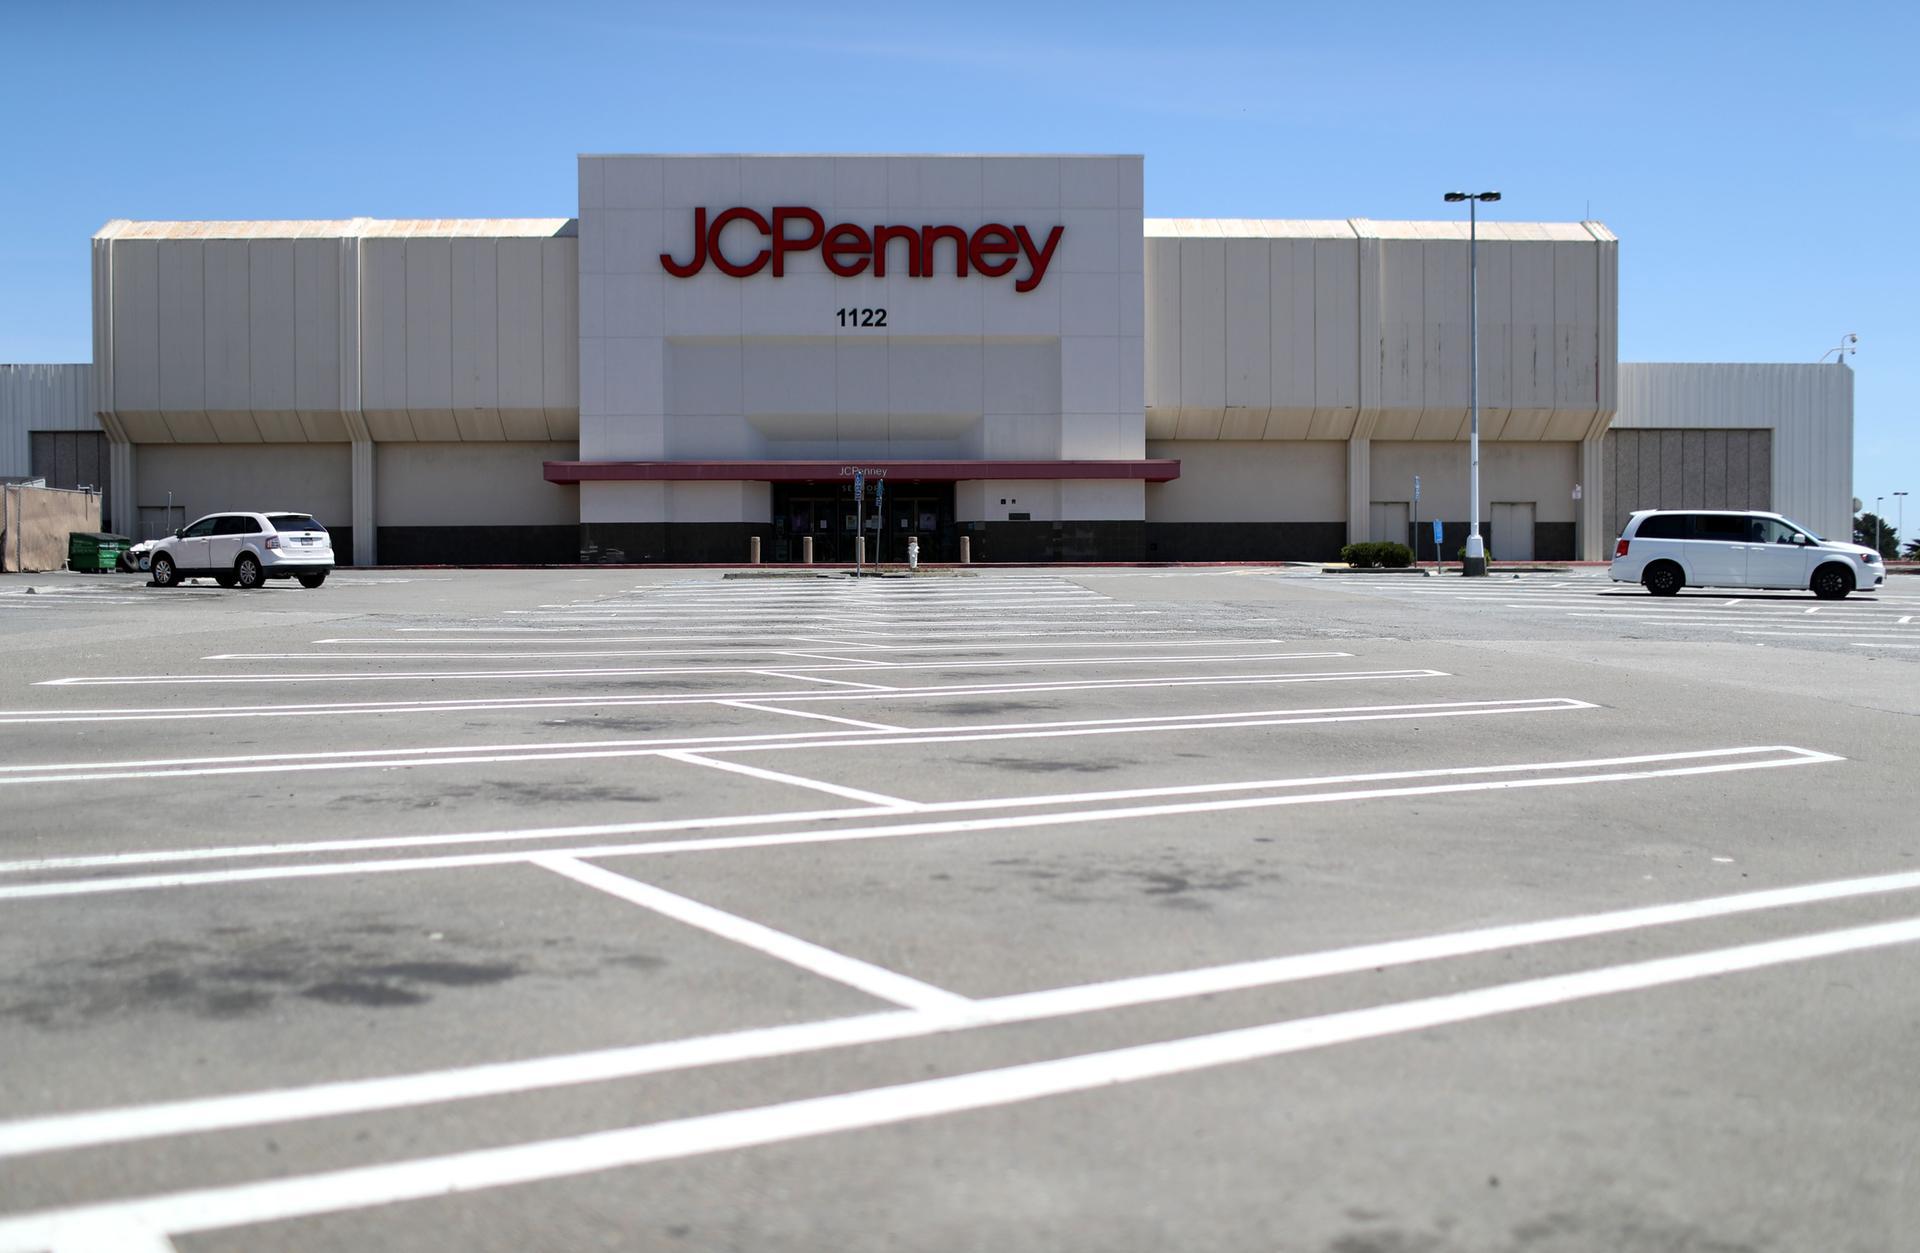 Today in the Connected Economy: Consumer Spending up, JCPenney's